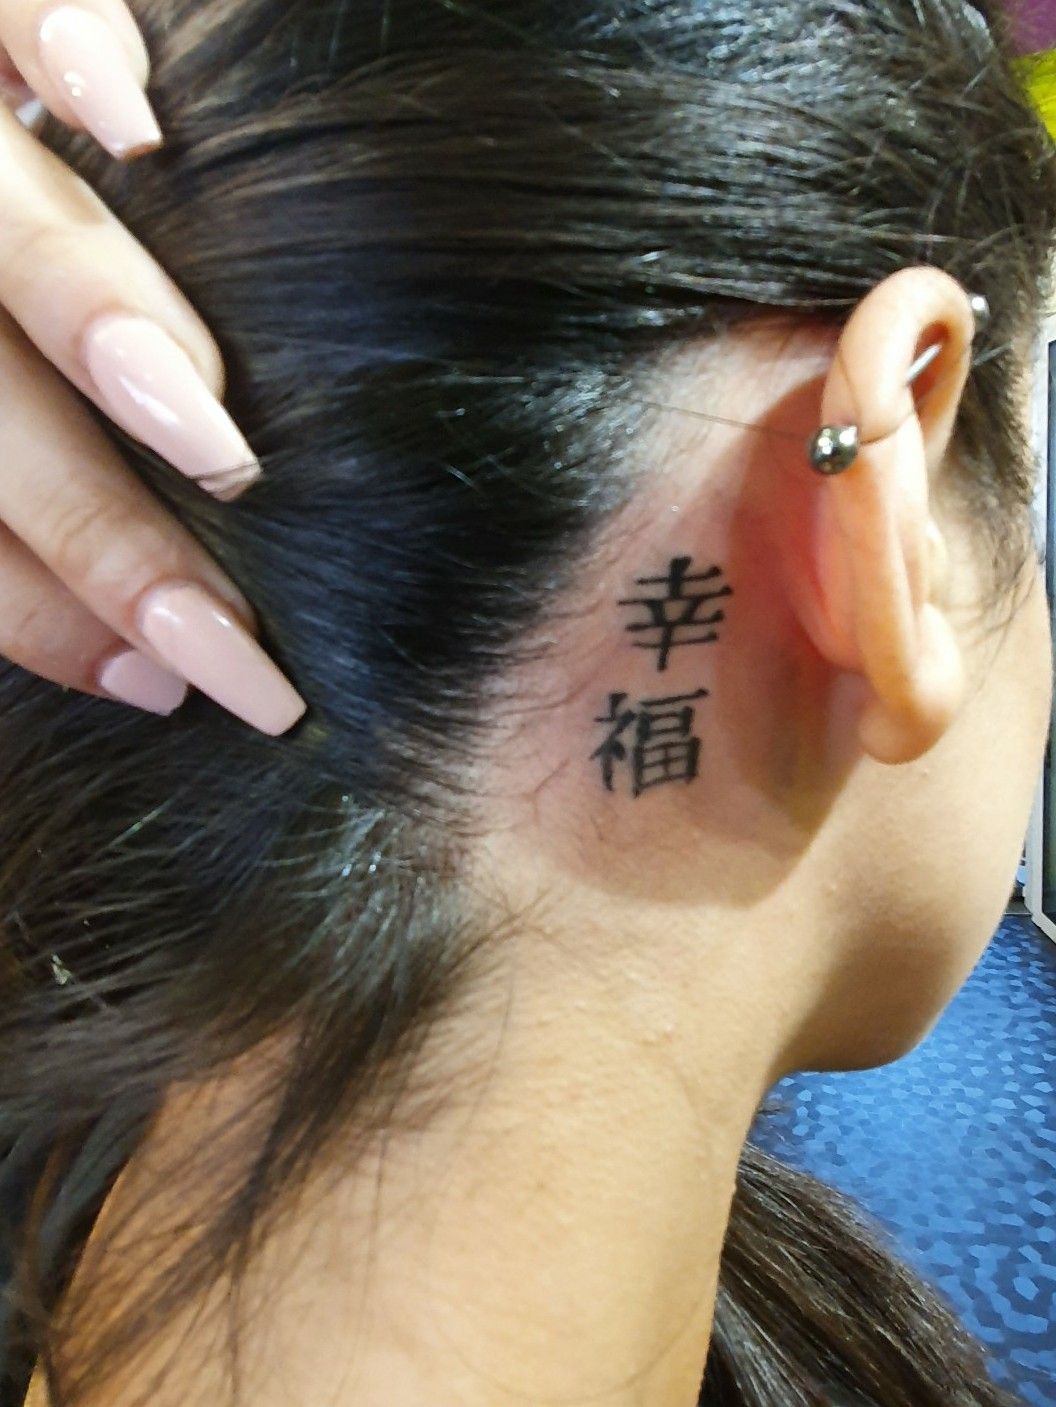 chinese symbol behind ear tattooTikTok Search